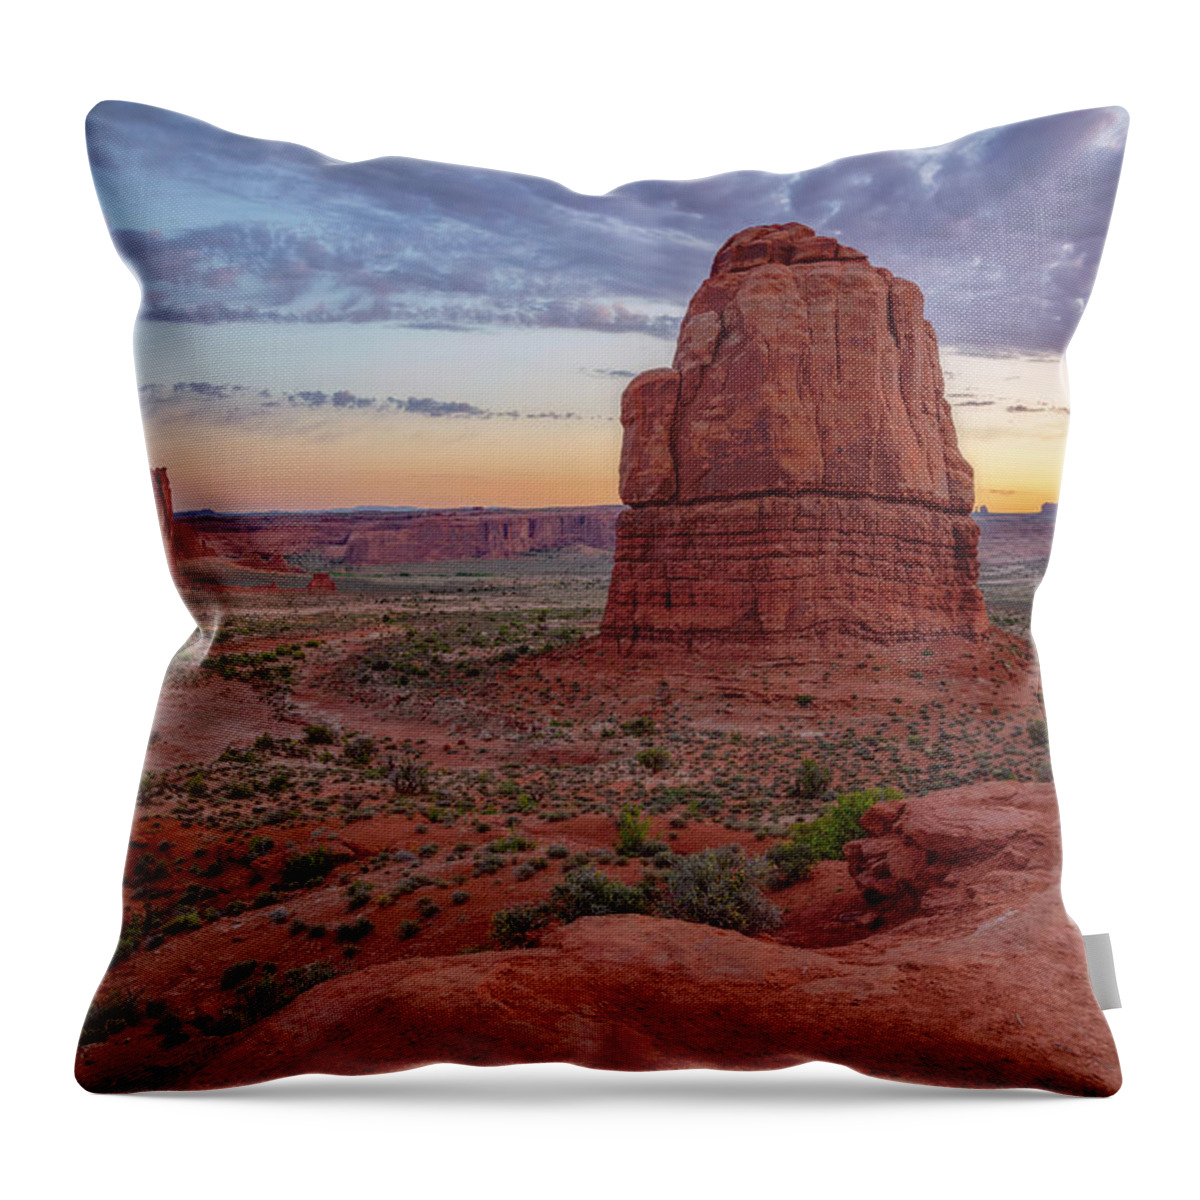 Utah Throw Pillow featuring the photograph Valley Views by Darren White